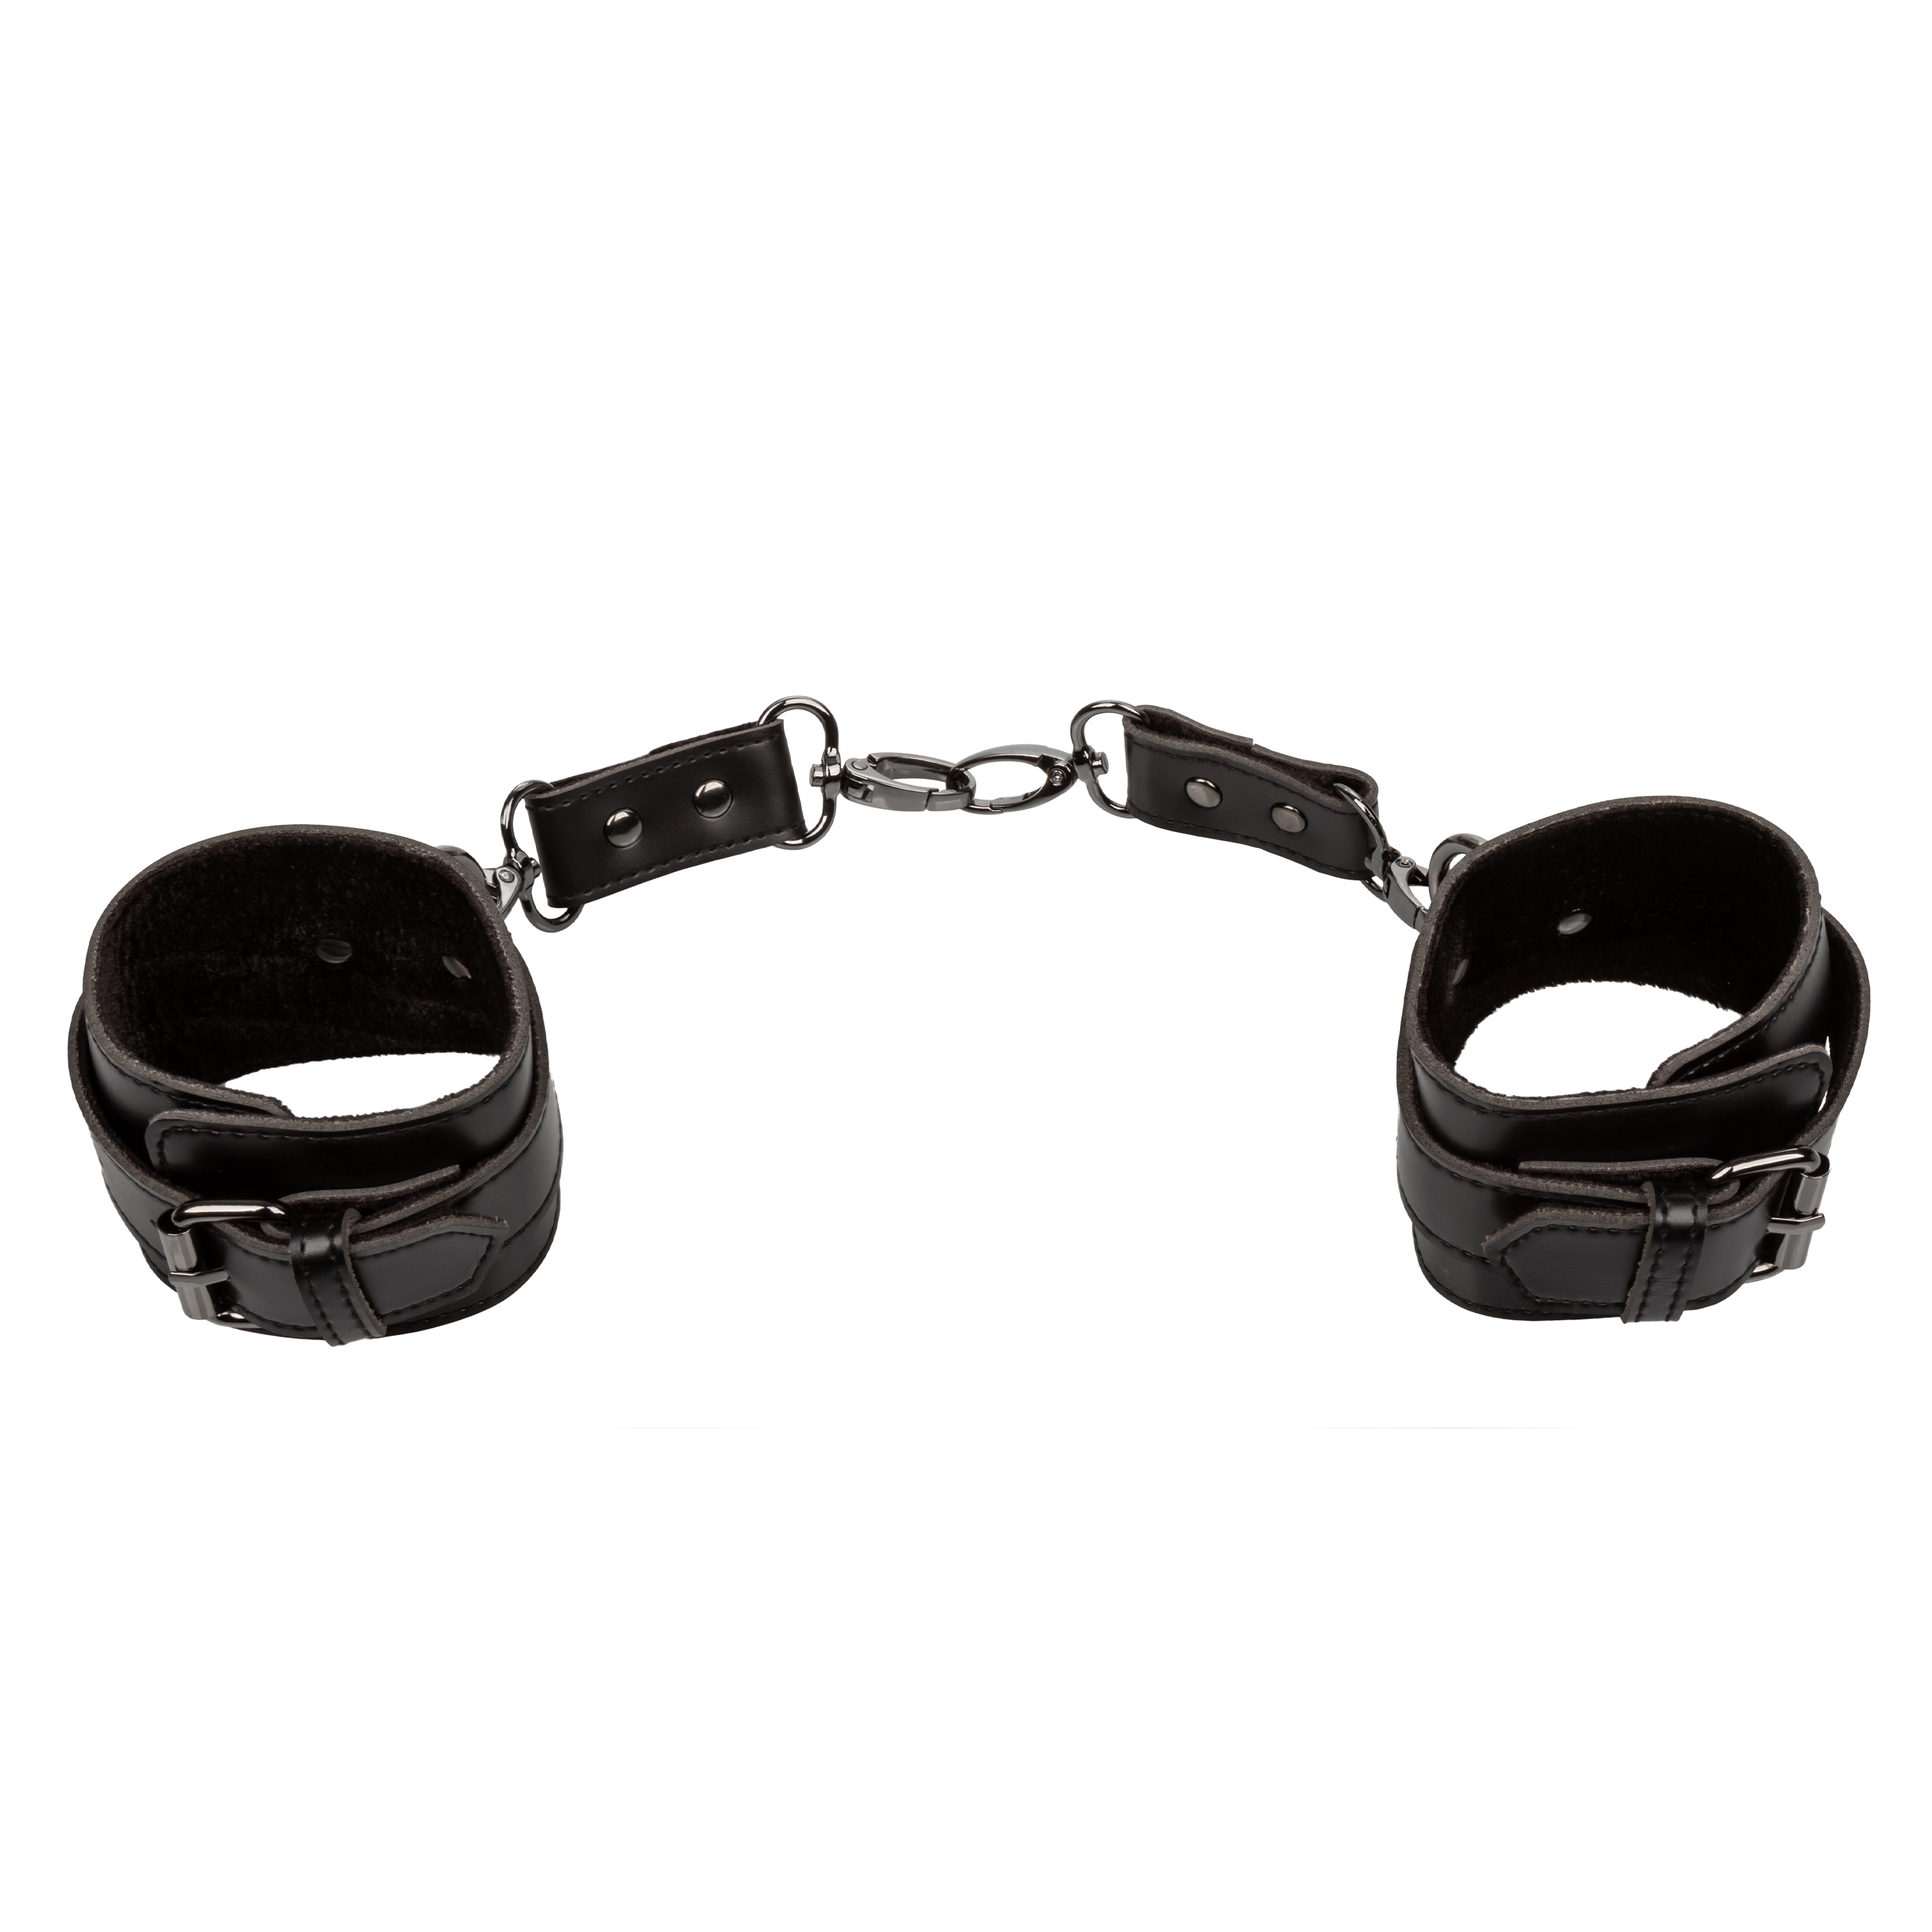 euphoria collection ankle cuffs black 